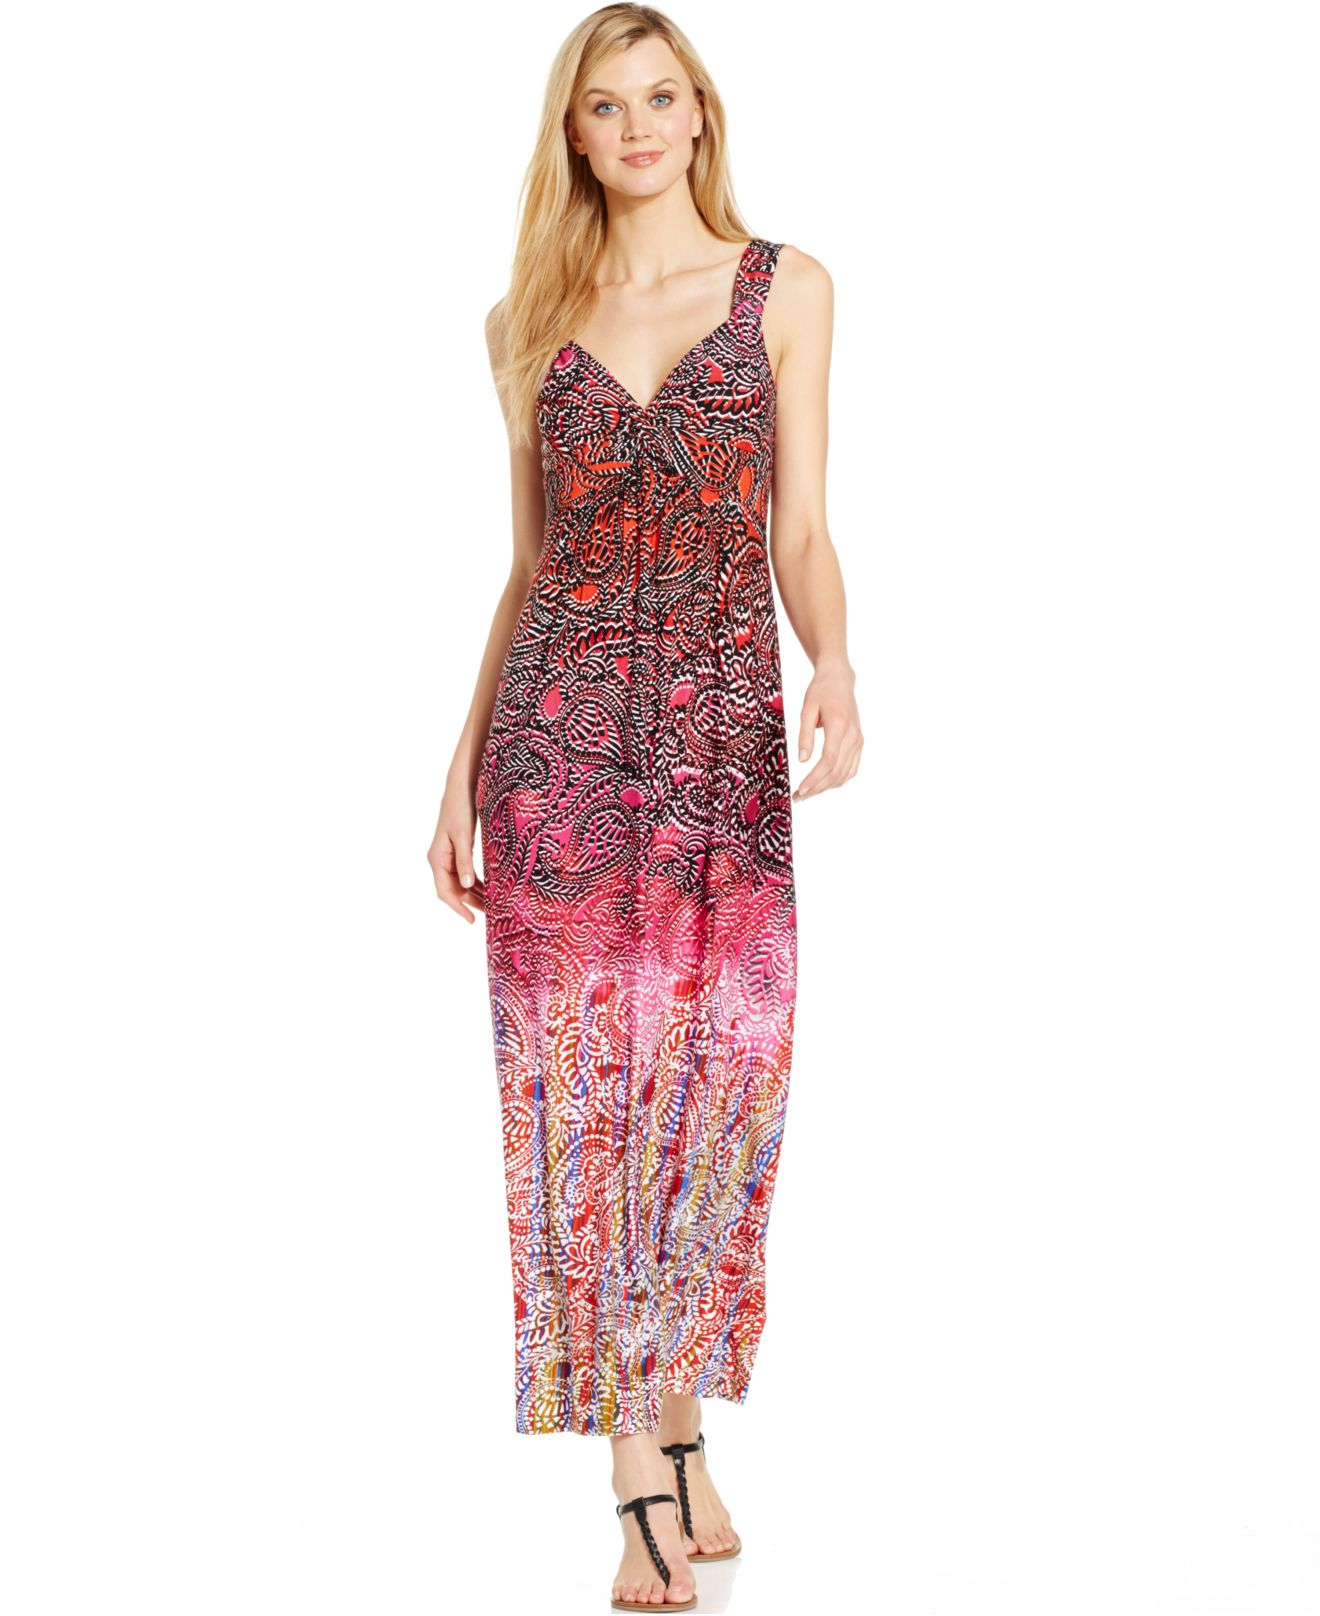 Lyst - Spense Petite Twist-front Printed Maxi Dress in Pink